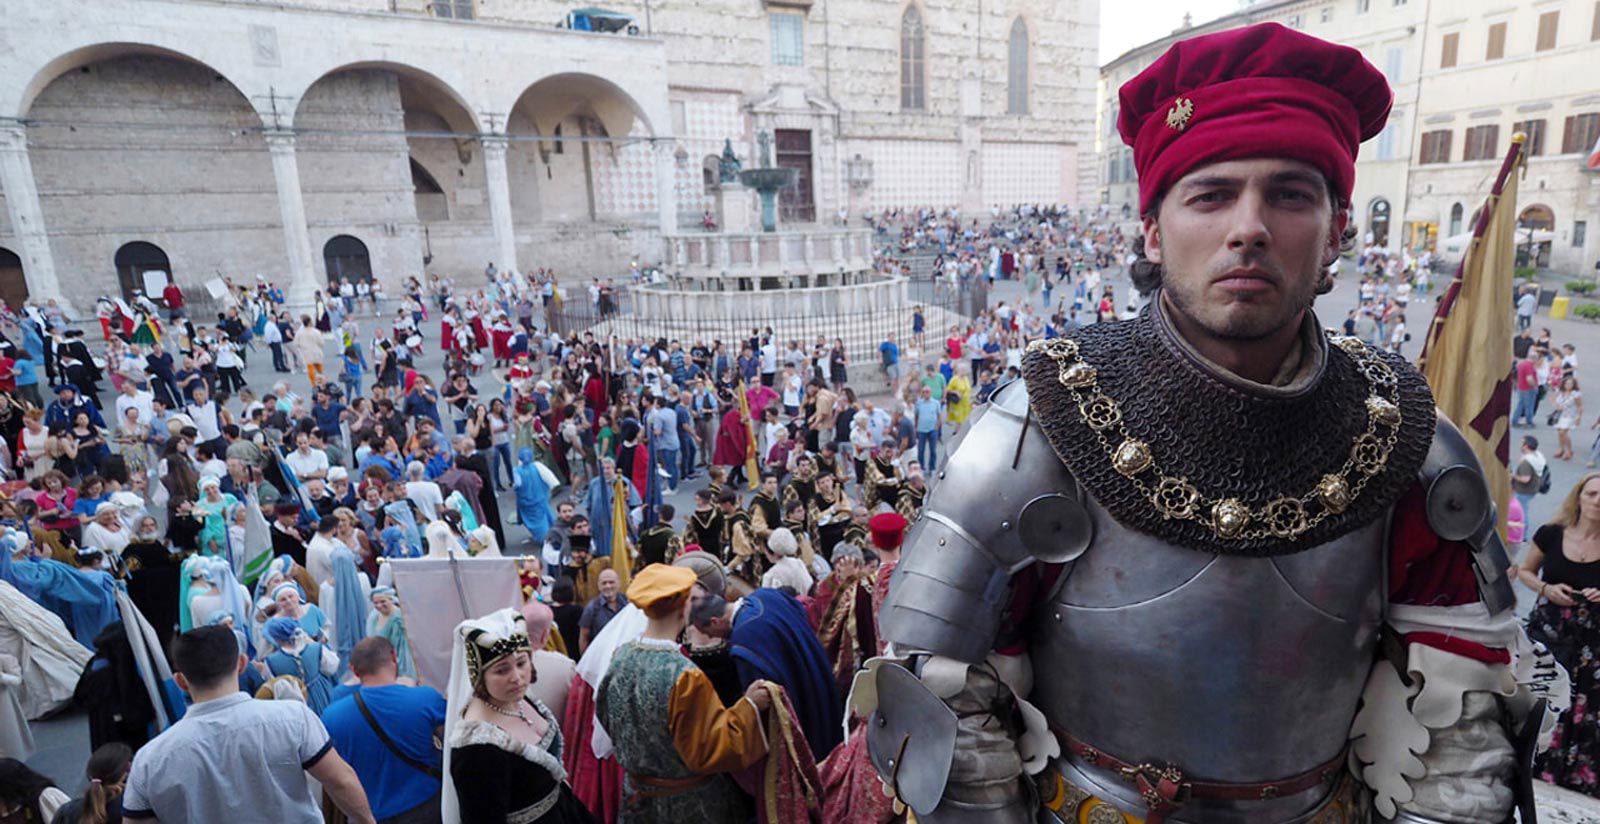 Perugia 1416 is a historical re-enactment 1